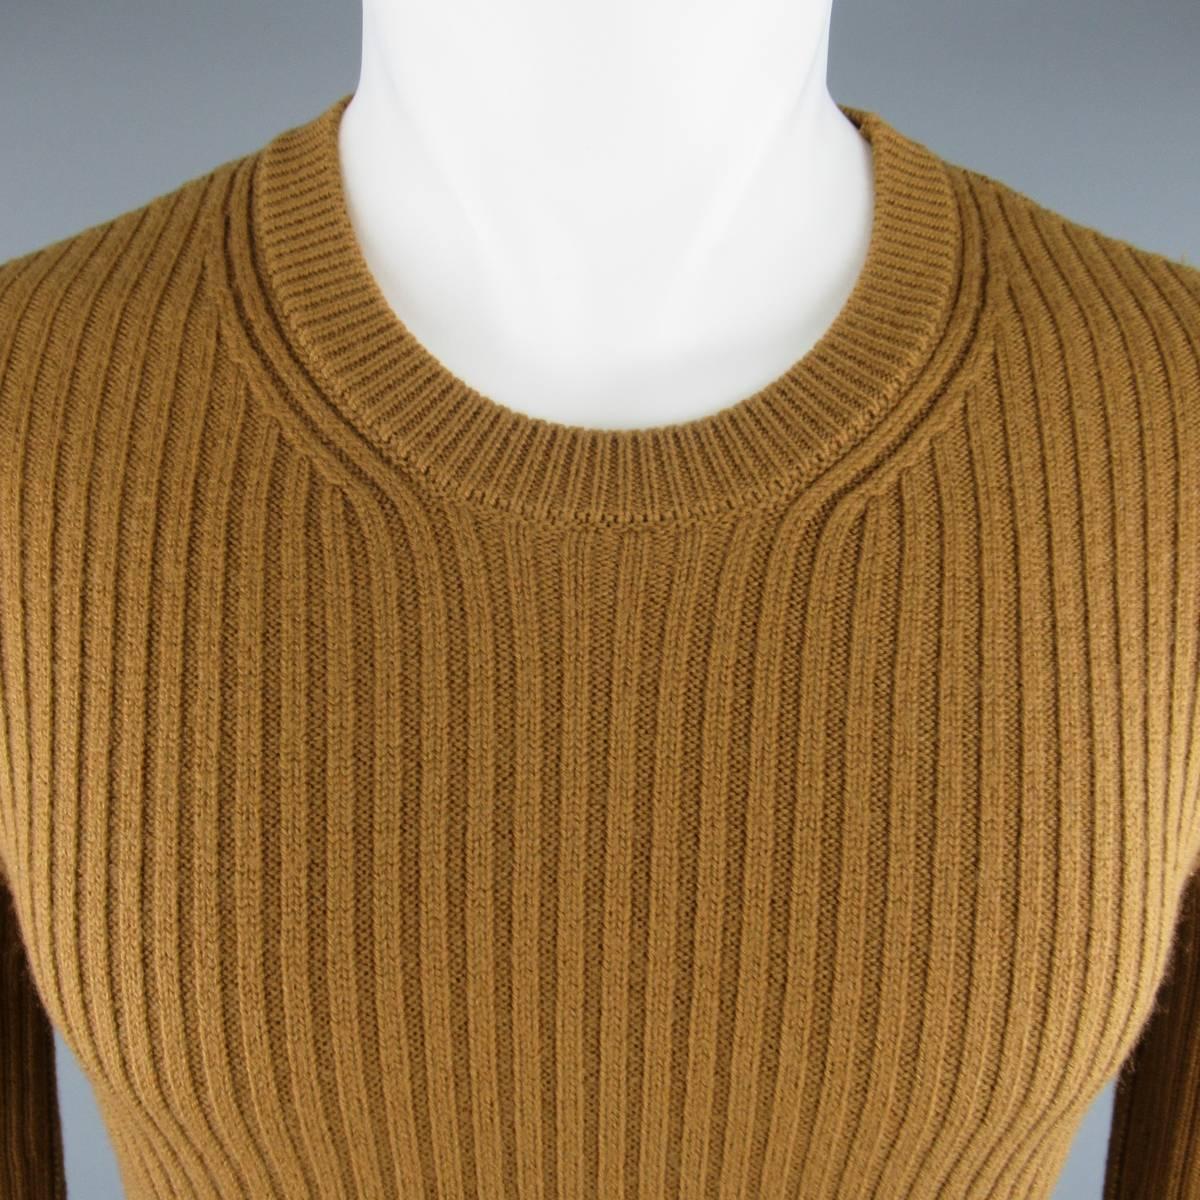 DOLCE & GABBANA Sweater consists of wool material in a tan color tone. Designed with a crew-neck collar and rib patterning throughout body. Made in Italy.
 
Good Pre-Owned Condition 
Marked Size: 48
 
Measurements
 
Shoulder: 16 in.
Chest: 36